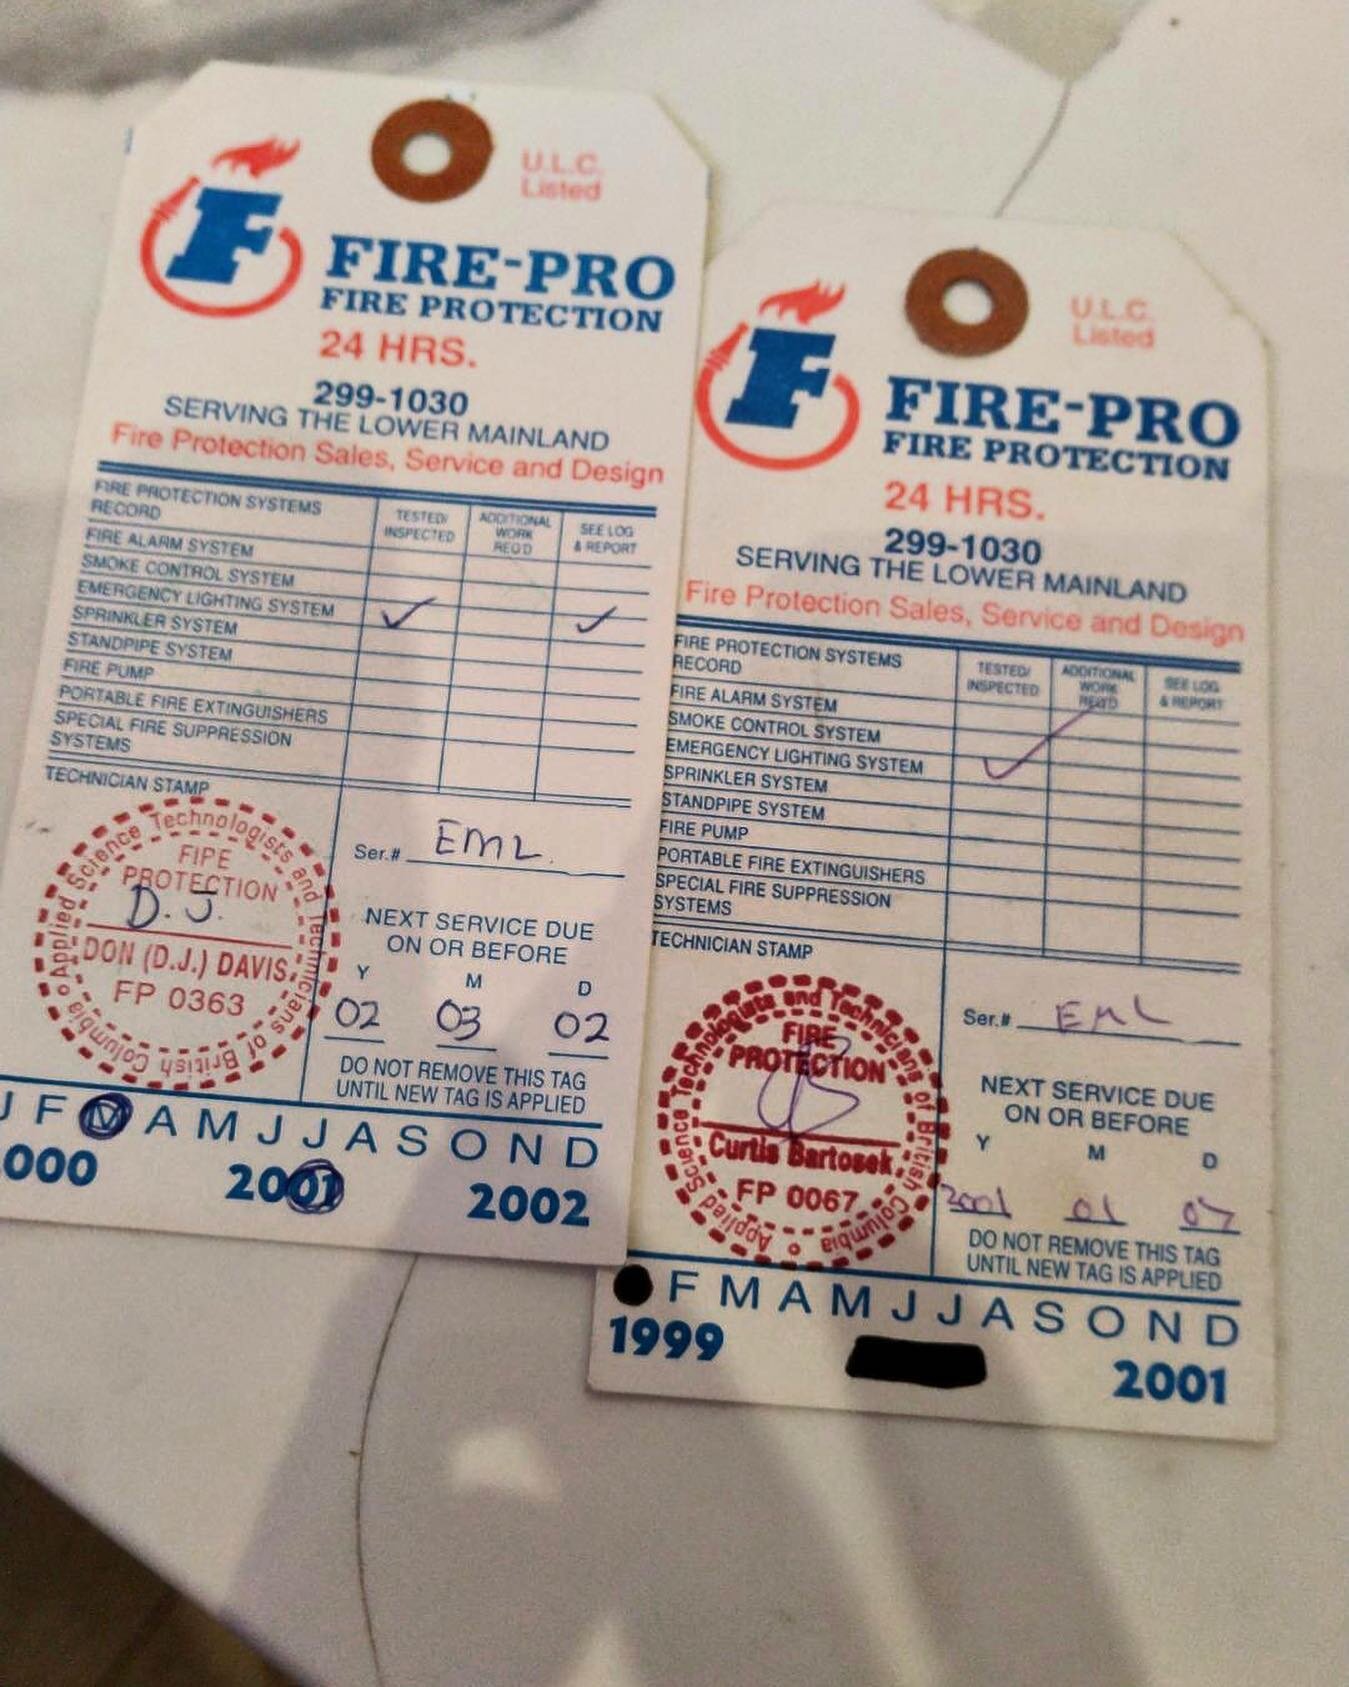 Friday Find! We&rsquo;ve been doing this for a long time. Our team of experienced technicians is long-tenured and does the job right always.

#trades #fireprotection #firealarm #firesprinkler #craftbusiness #culture #vancouver